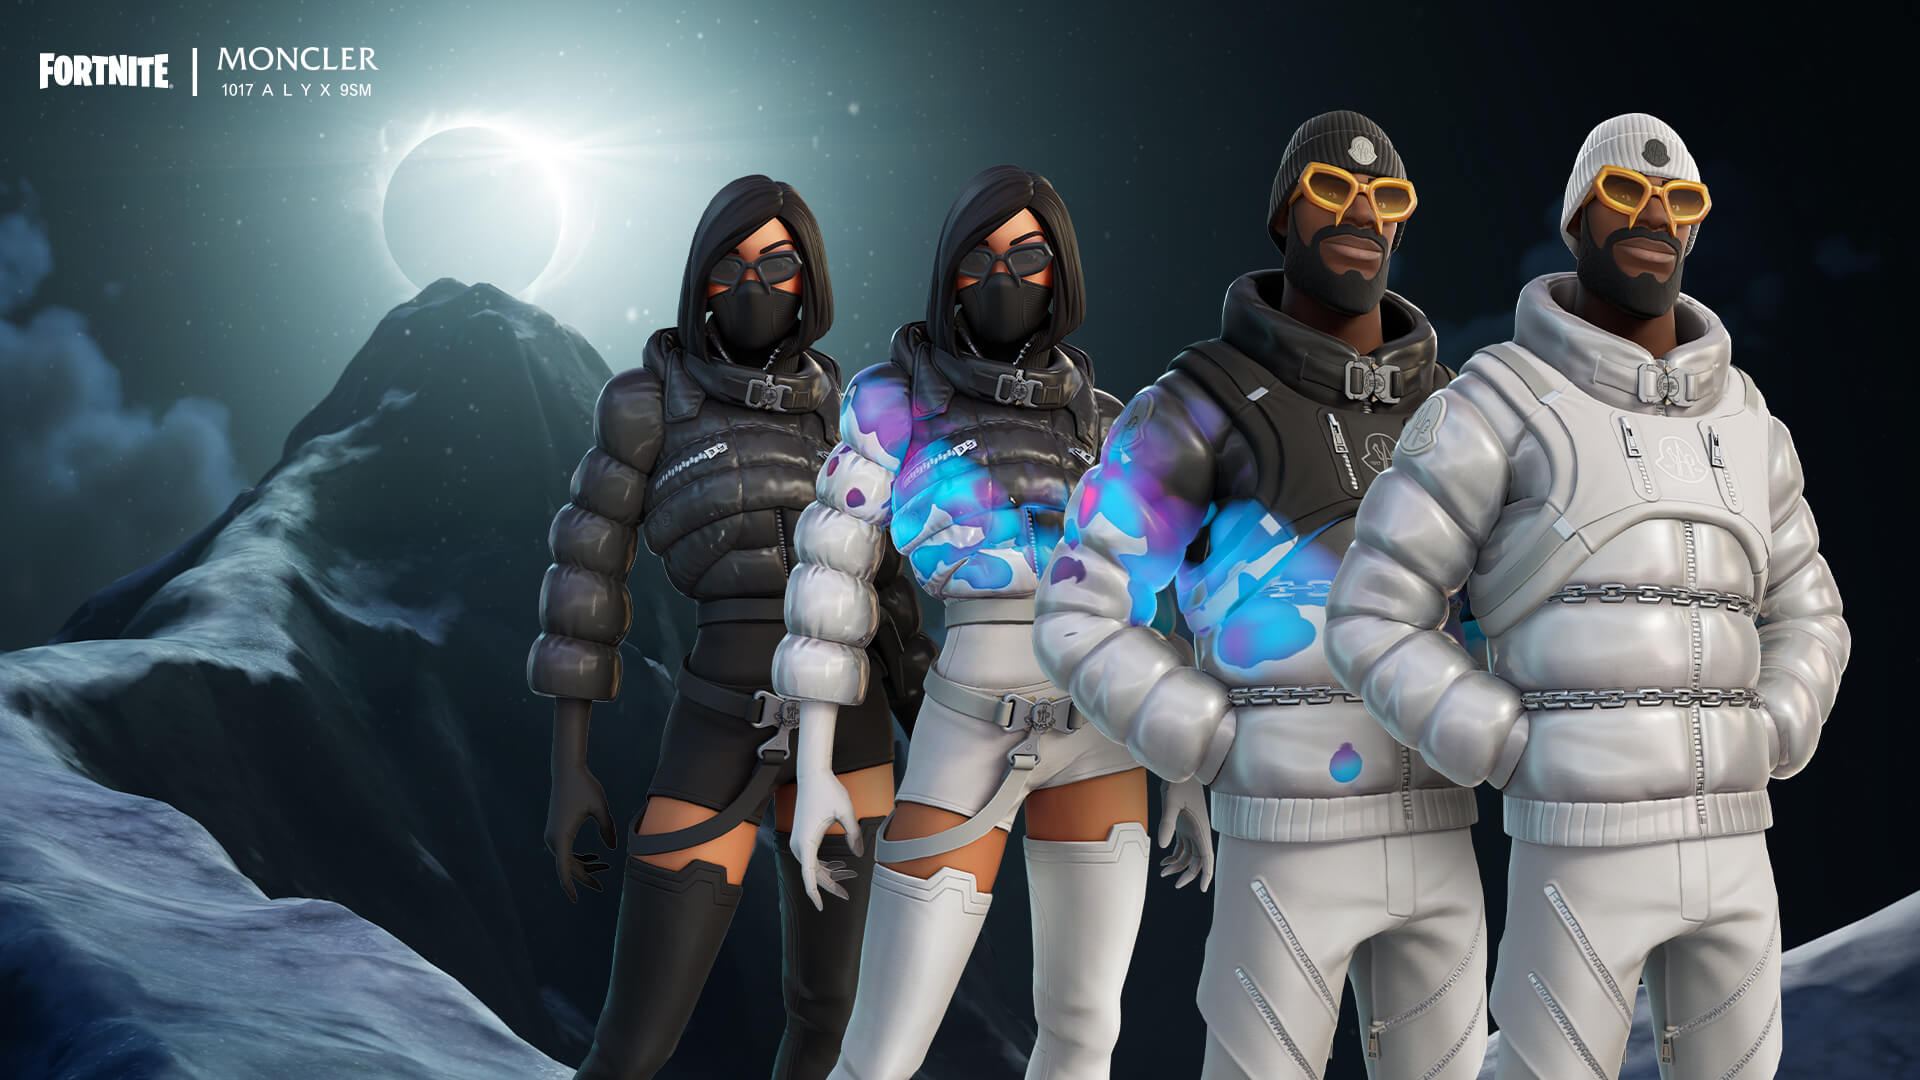 Outfits with Moncler clothes are coming to Fortnite  